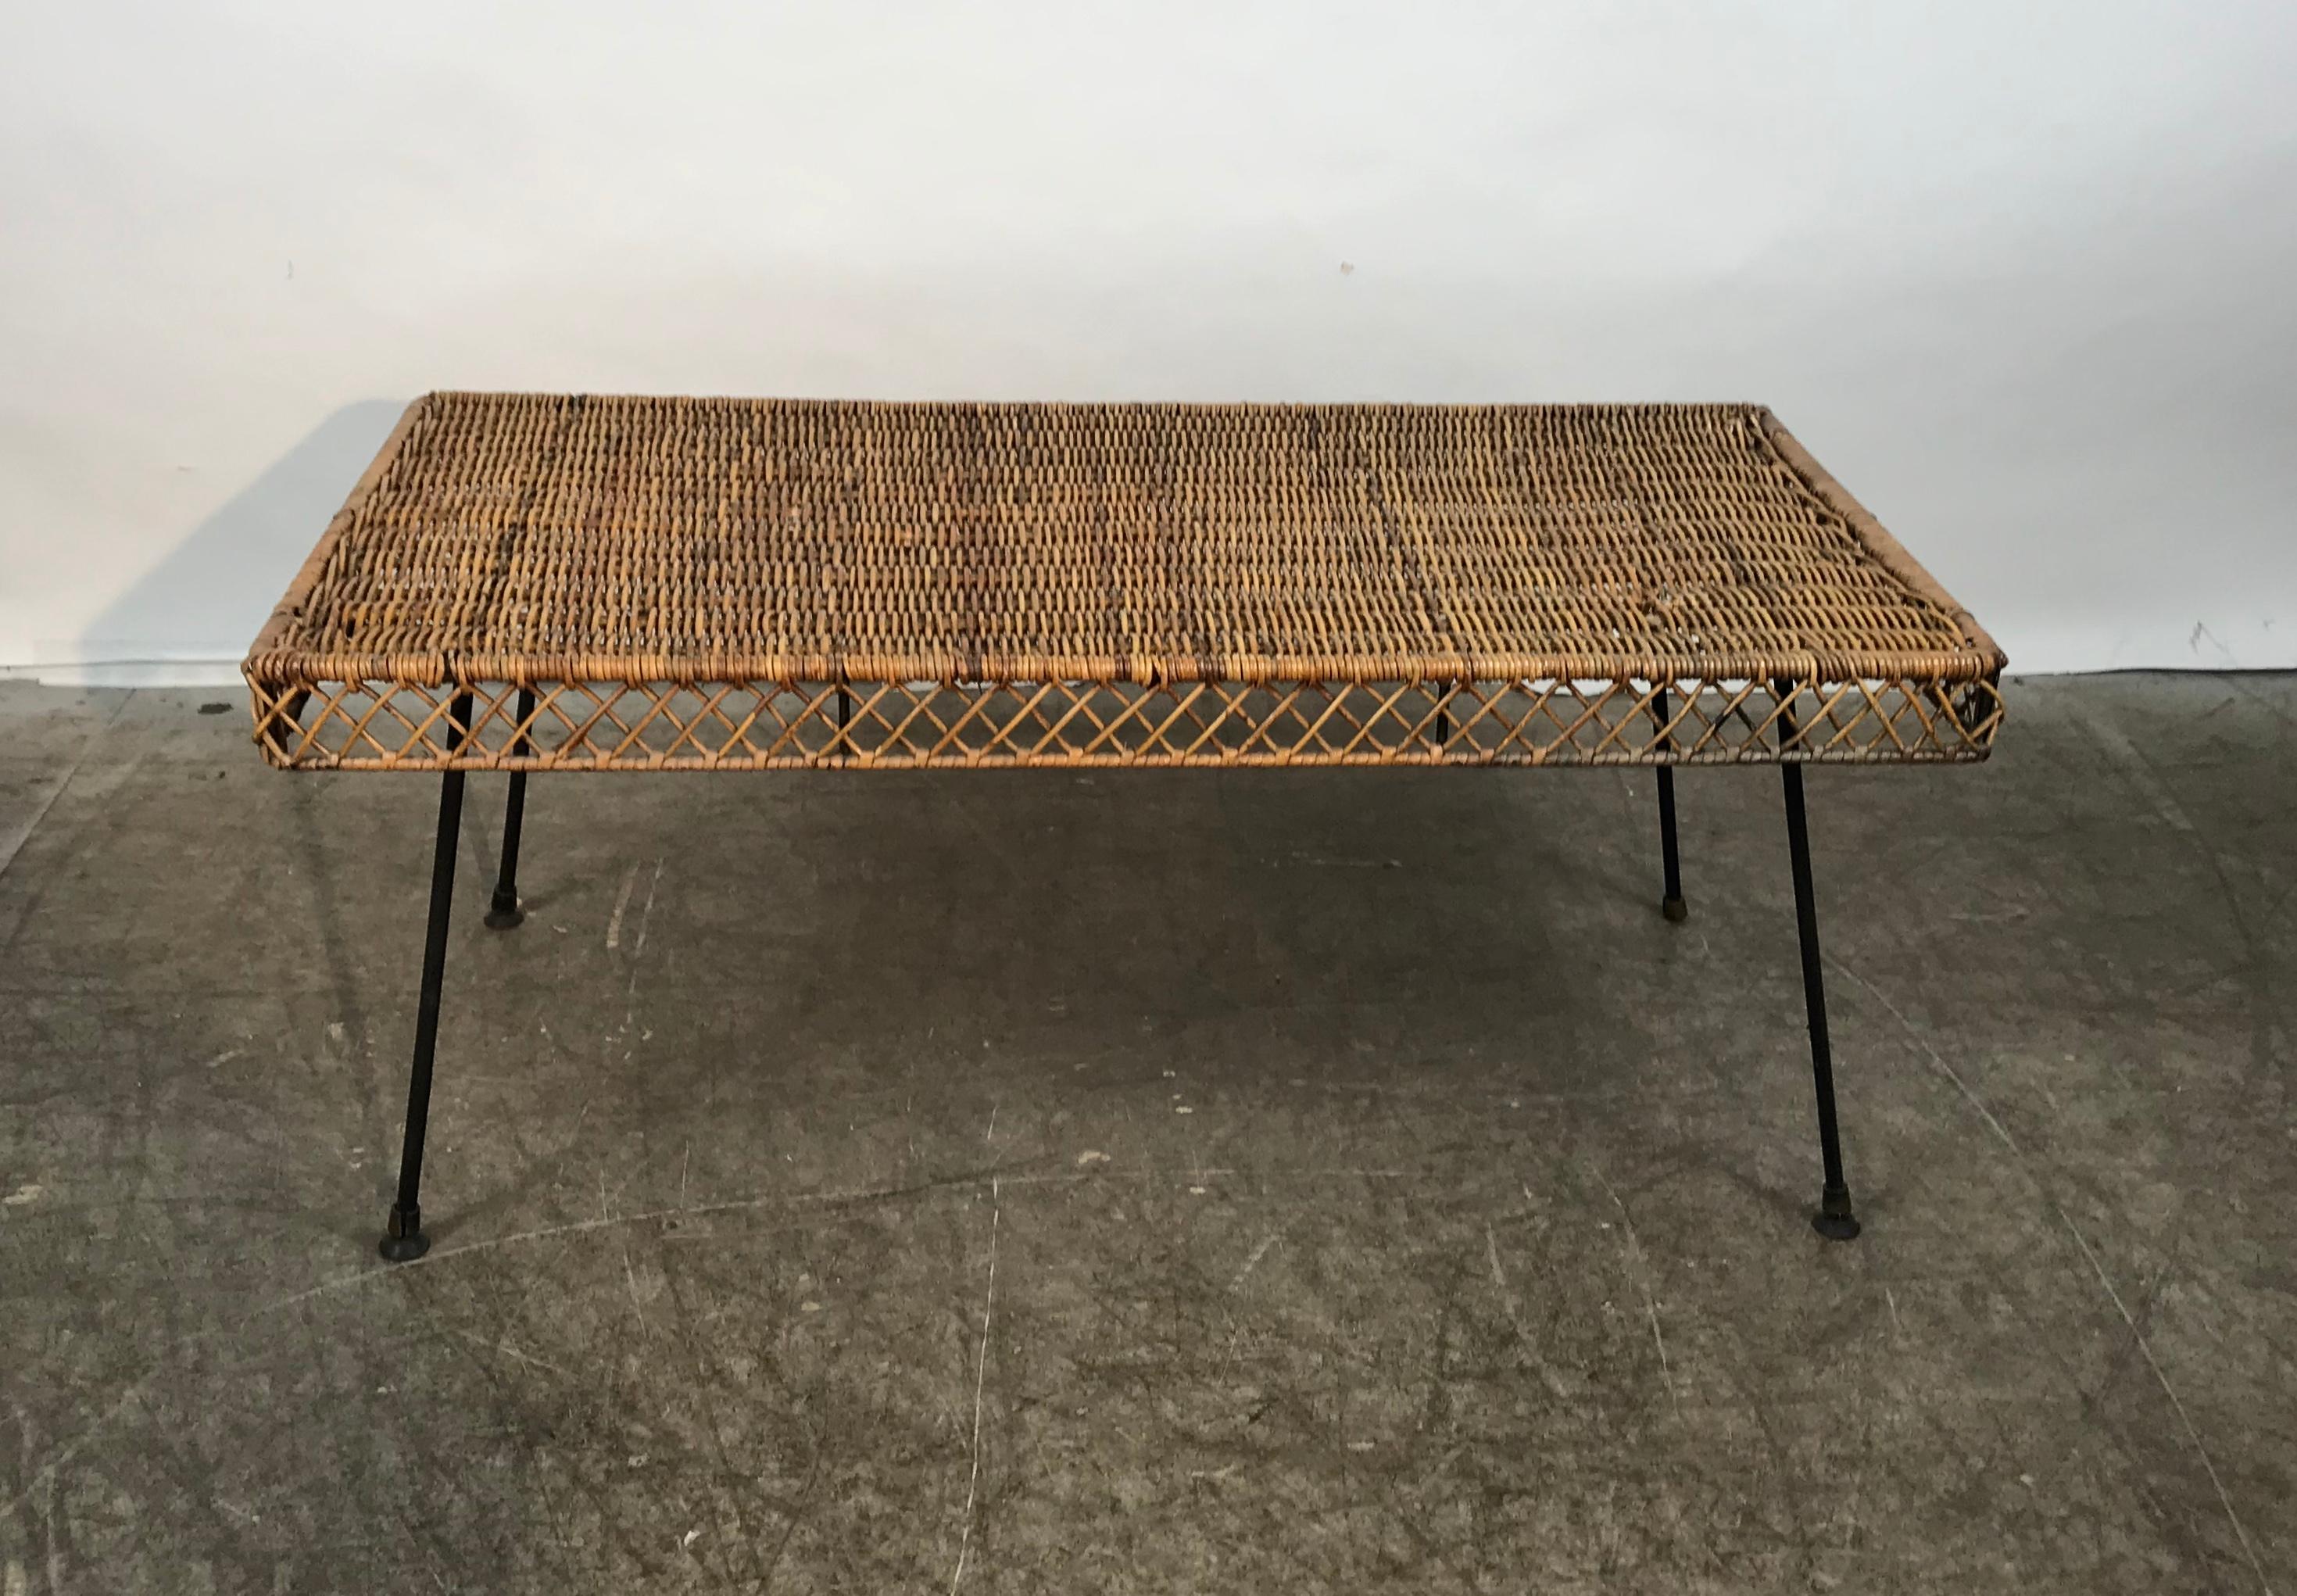 Classic Mid-Century Modern wicker and iron cocktail table by Danny Ho Fong.